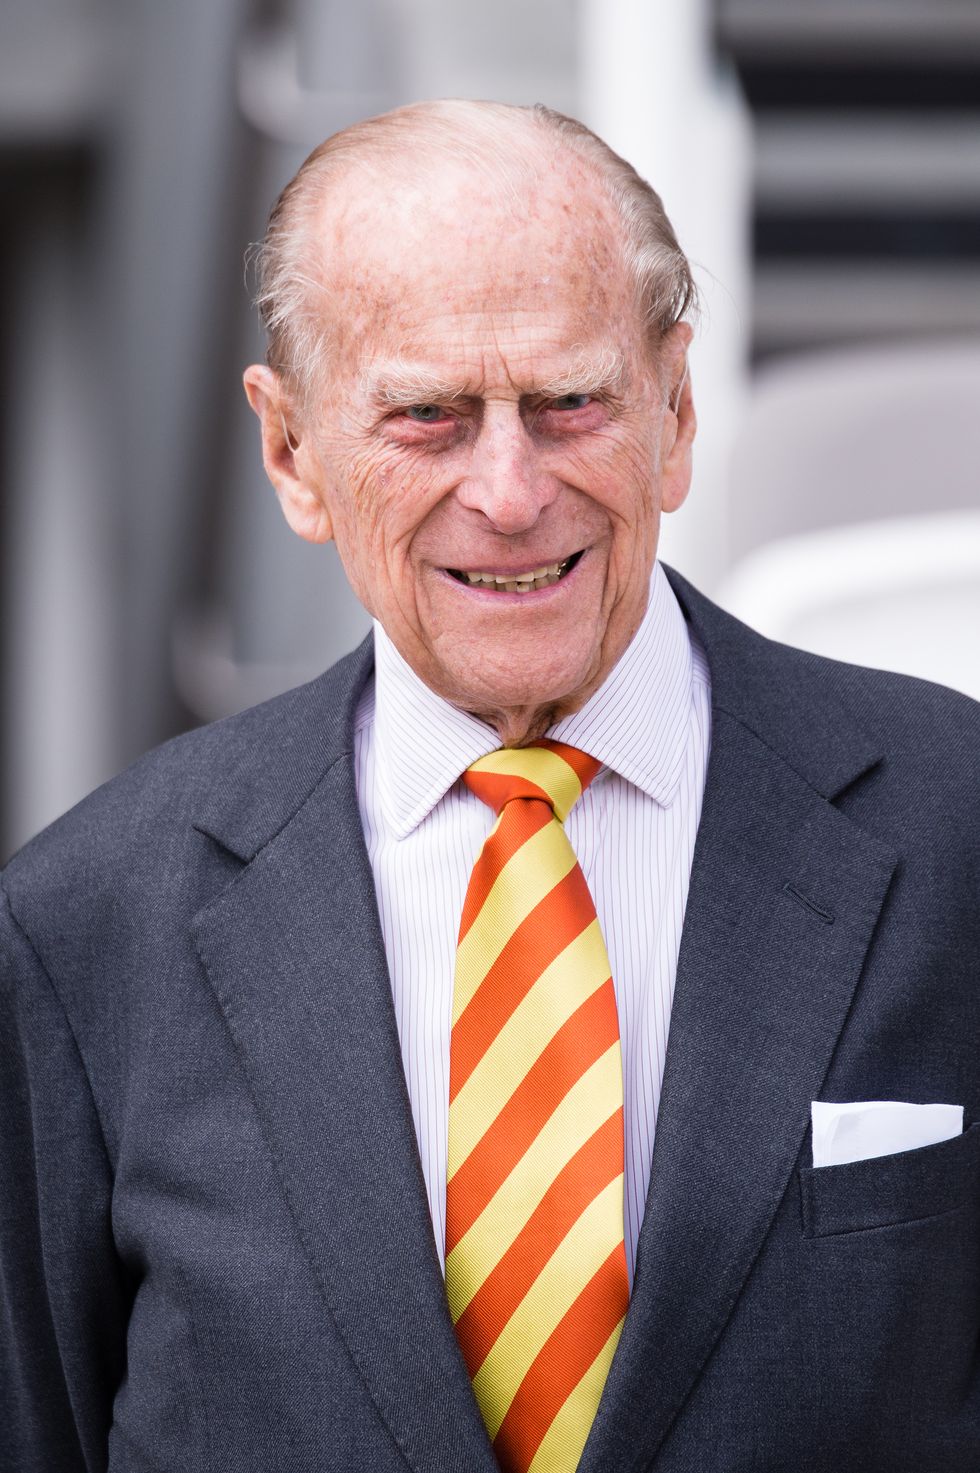 The Duke Of Edinburgh Opens New Warner Stand At Lord's Cricket Ground